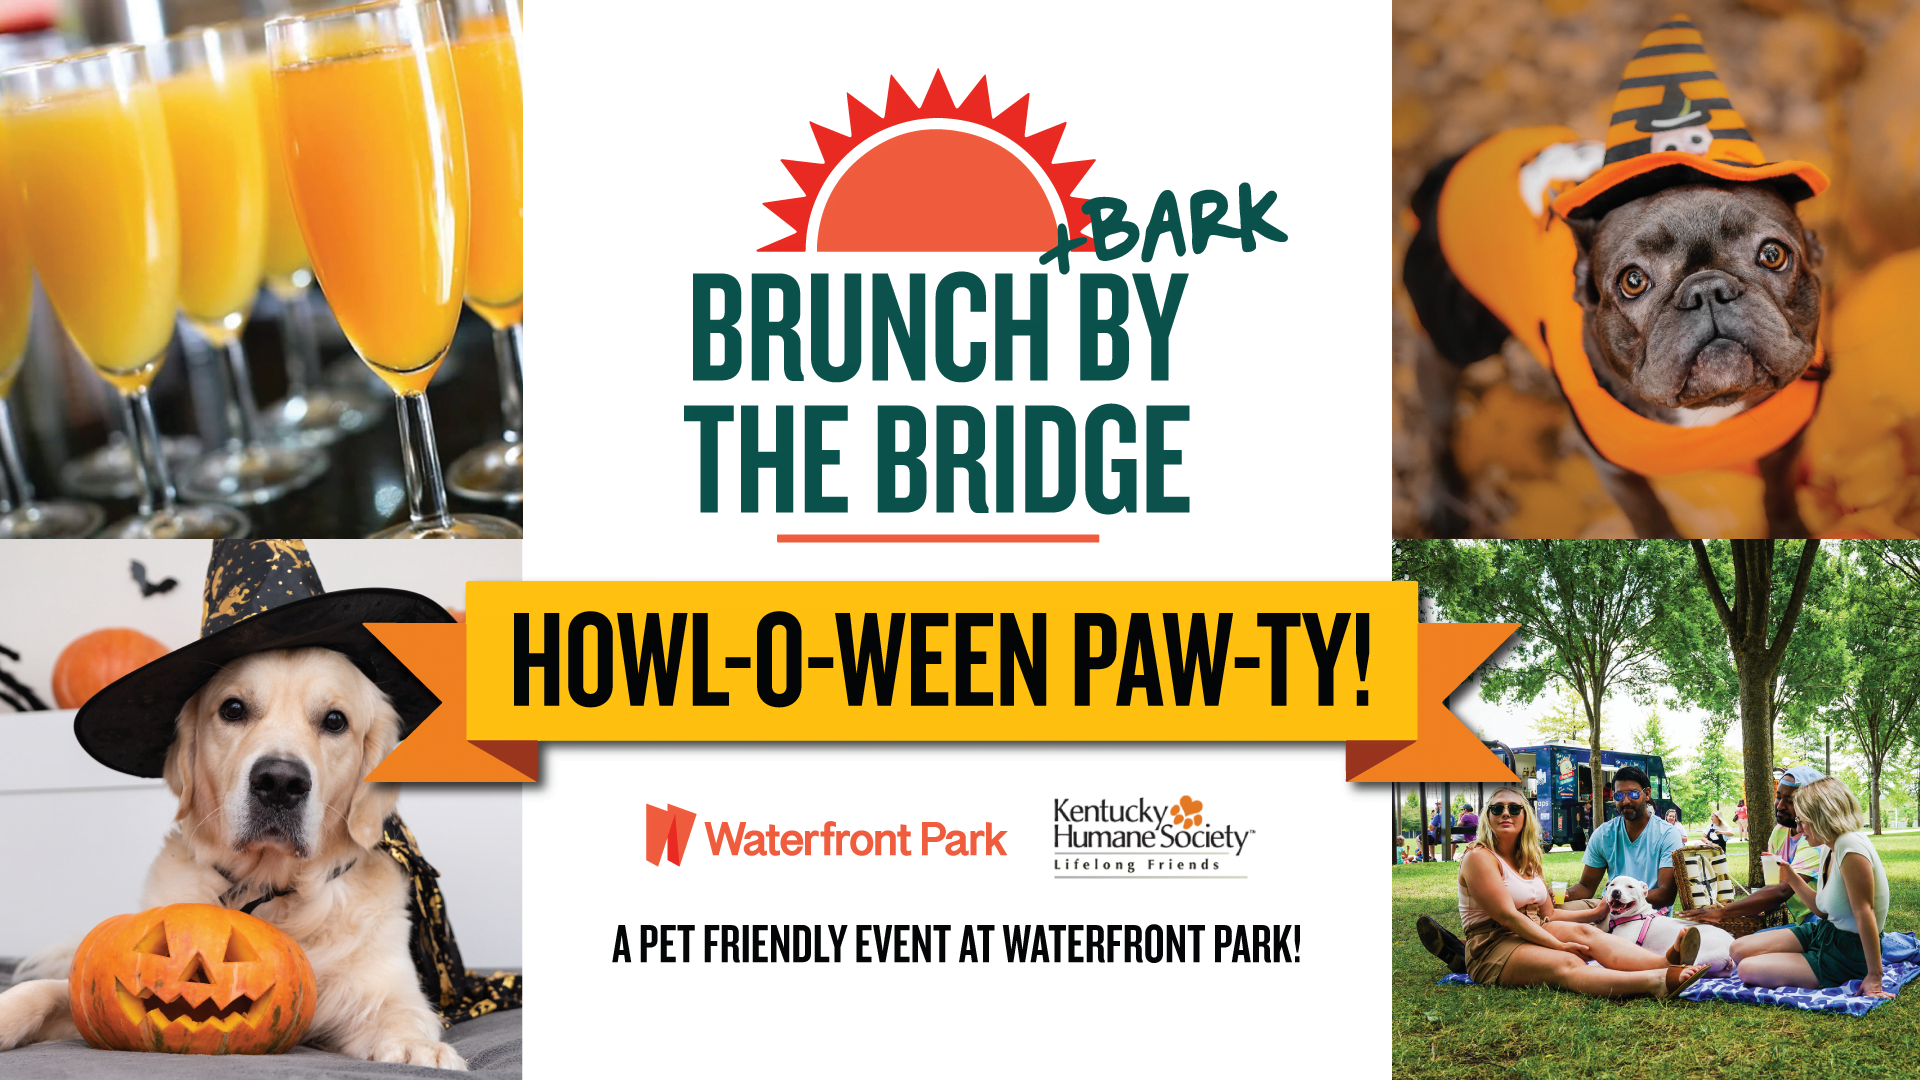 CANCELLED DUE TO WEATHER - Brunch + Bark By The Bridge Howl-o-ween Pawty!